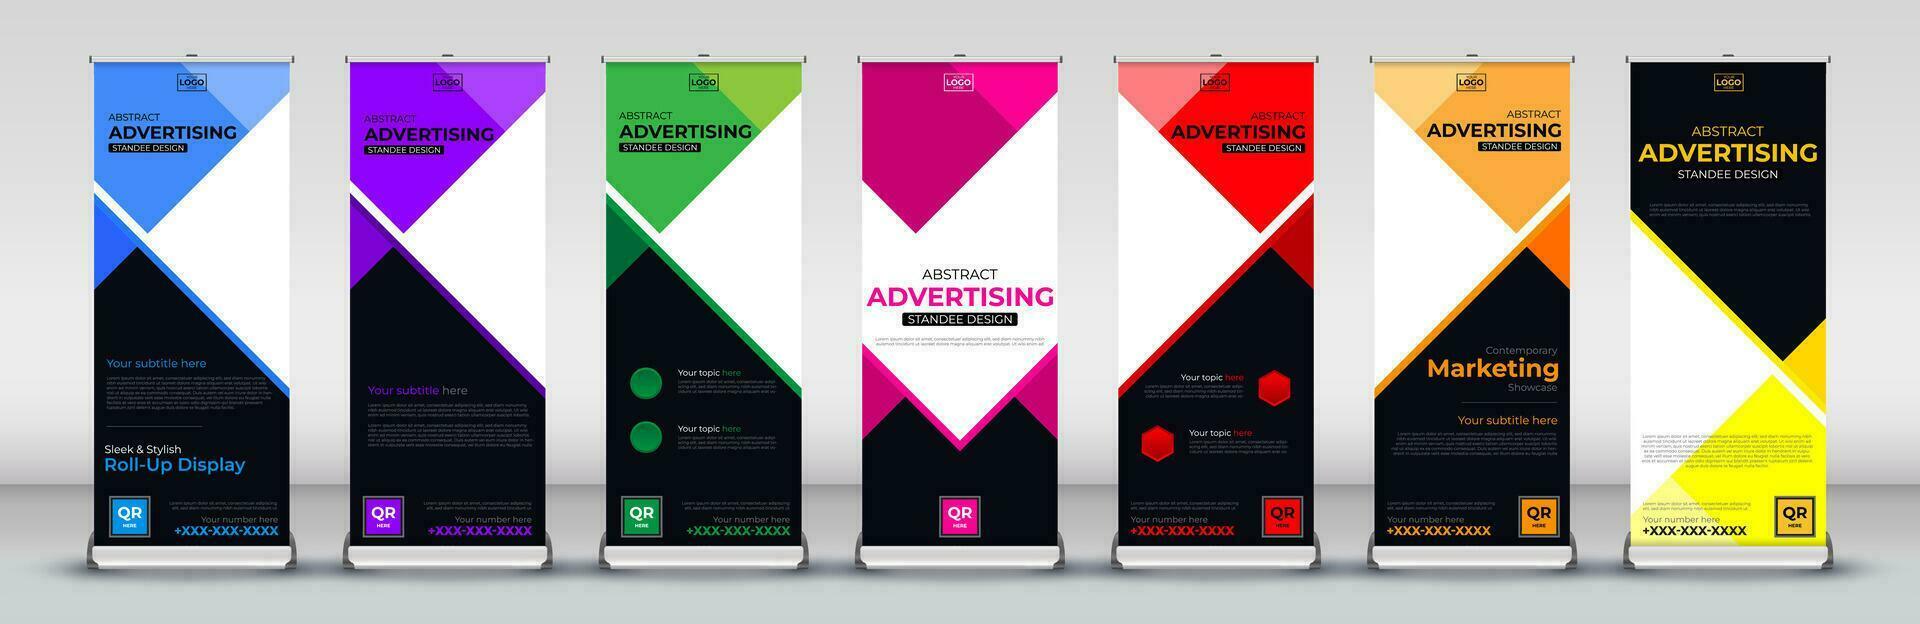 vertical roll up standee set for Street Business, events, presentations, meetings, annual events, exhibitions vector